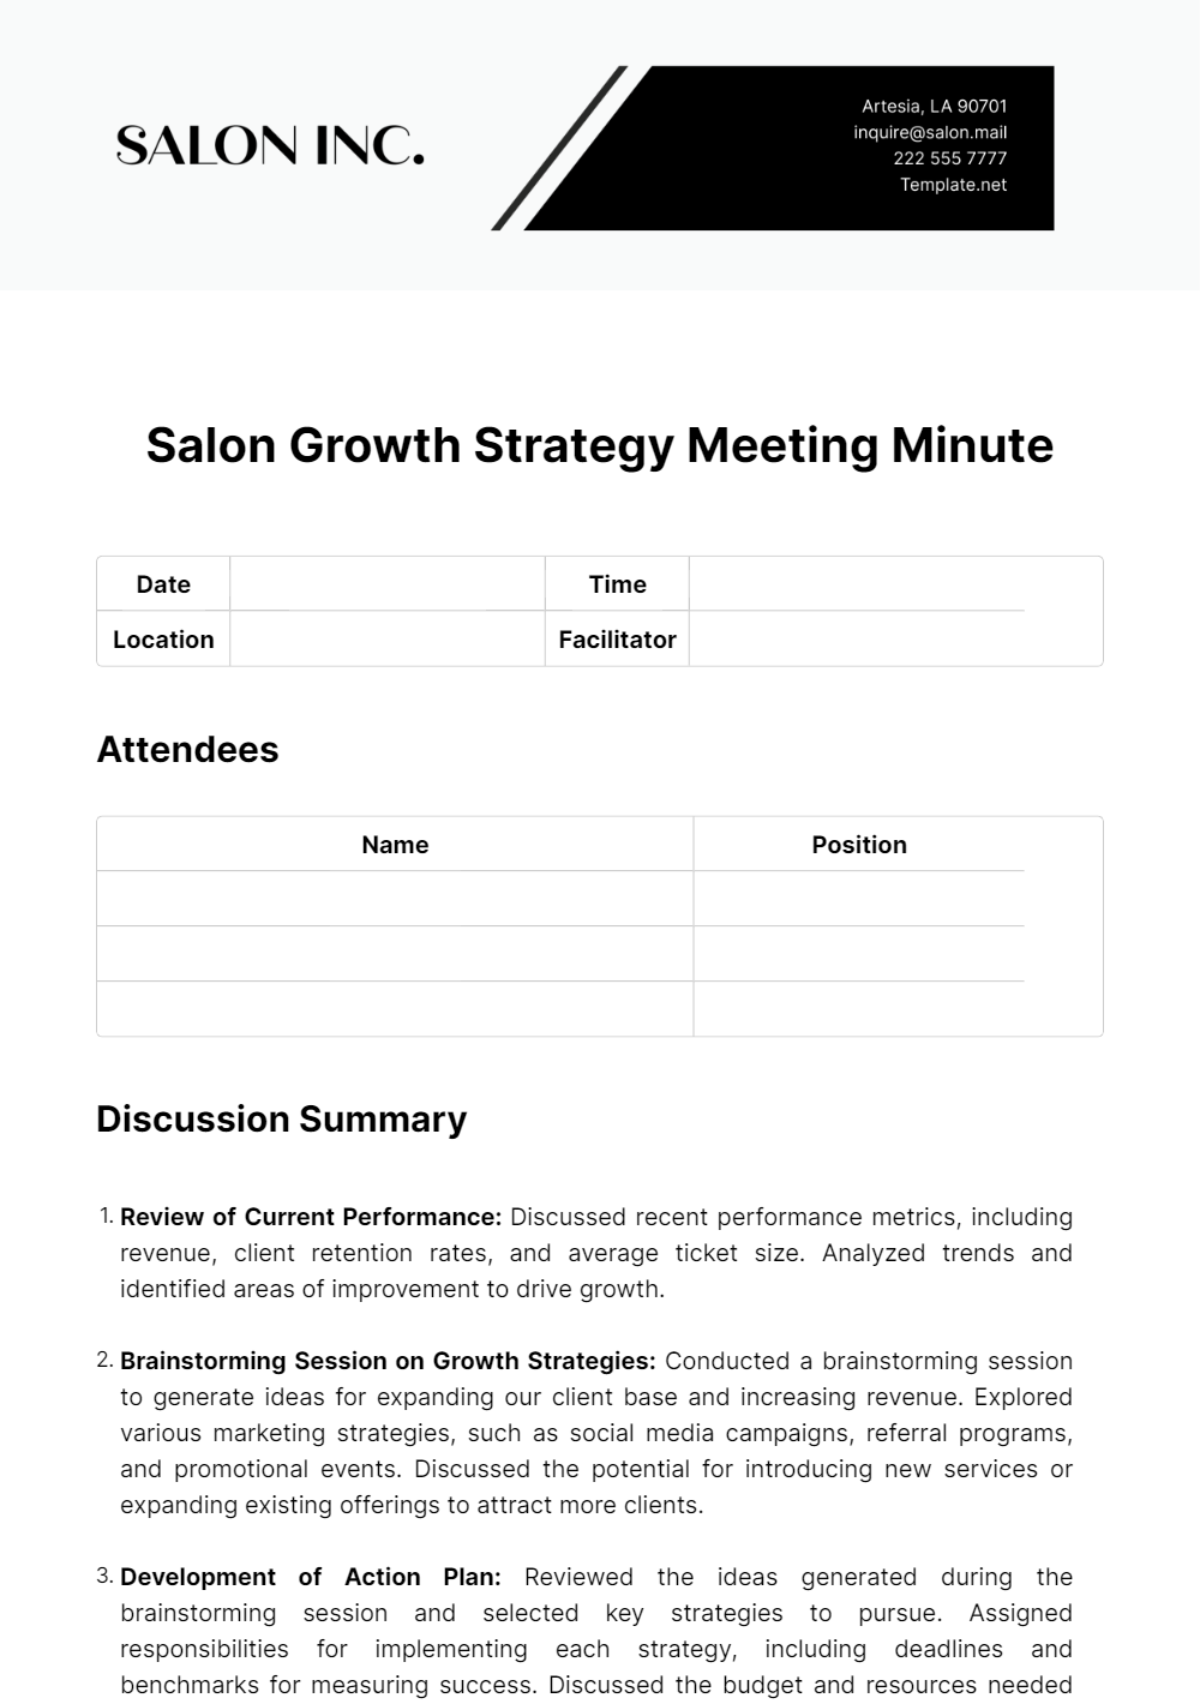 Free Salon Growth Strategy Meeting Minute Template